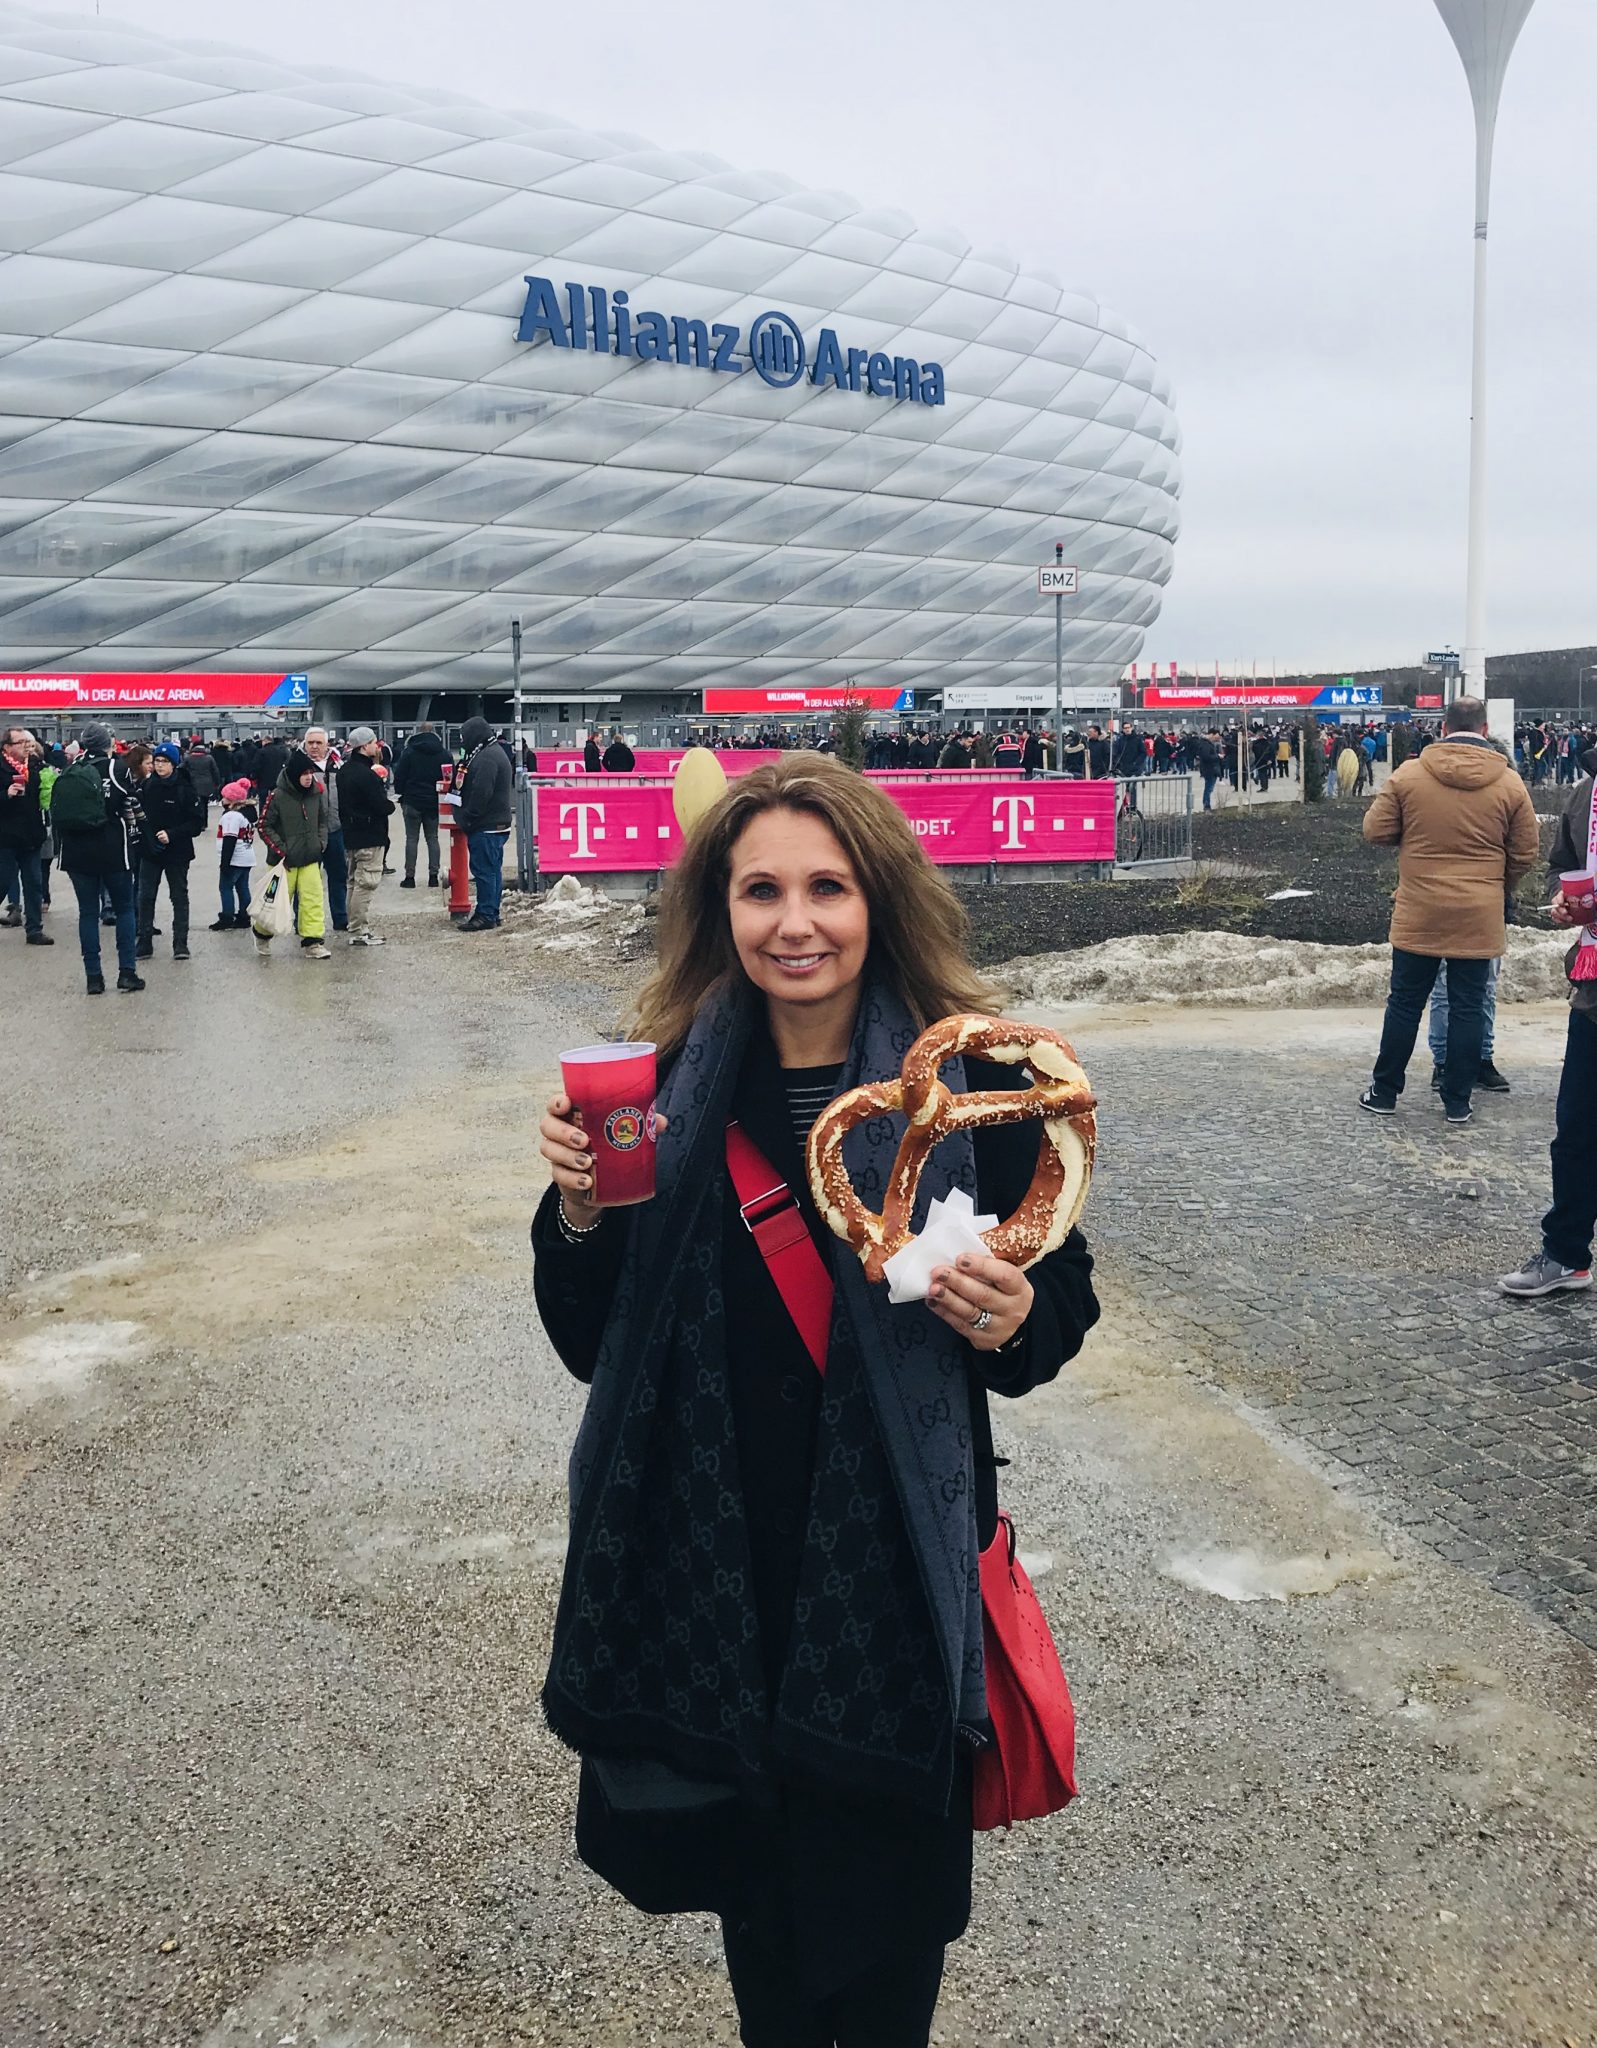 allianz arena in munich germany with pretzels and beer